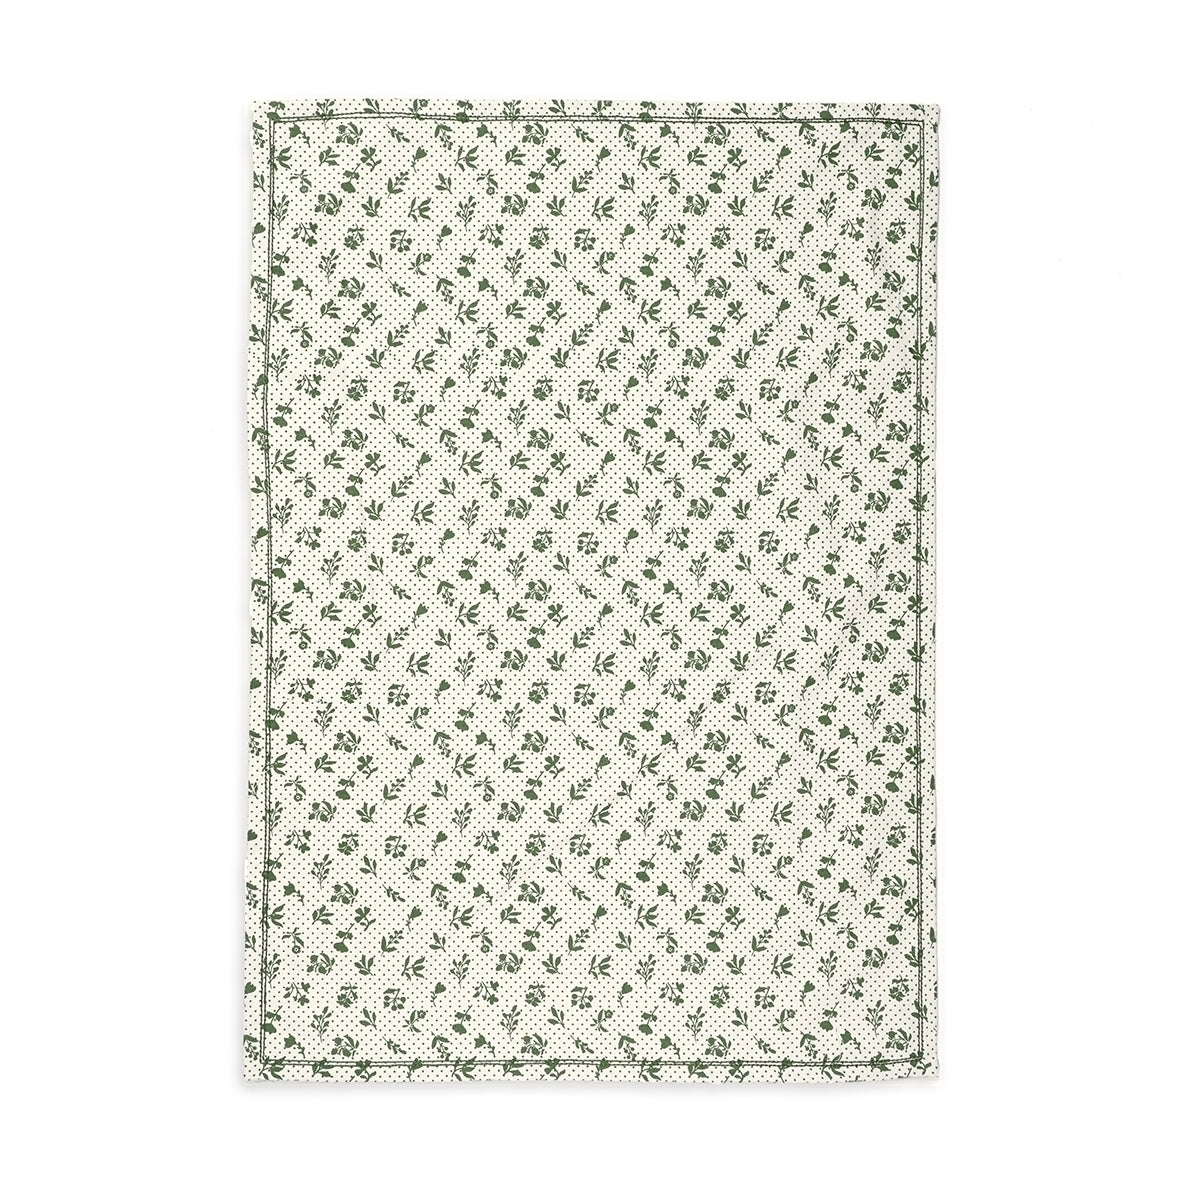 Green Printed Kitchen Towel, small floral pattern, 100% cotton, size 20"X28"